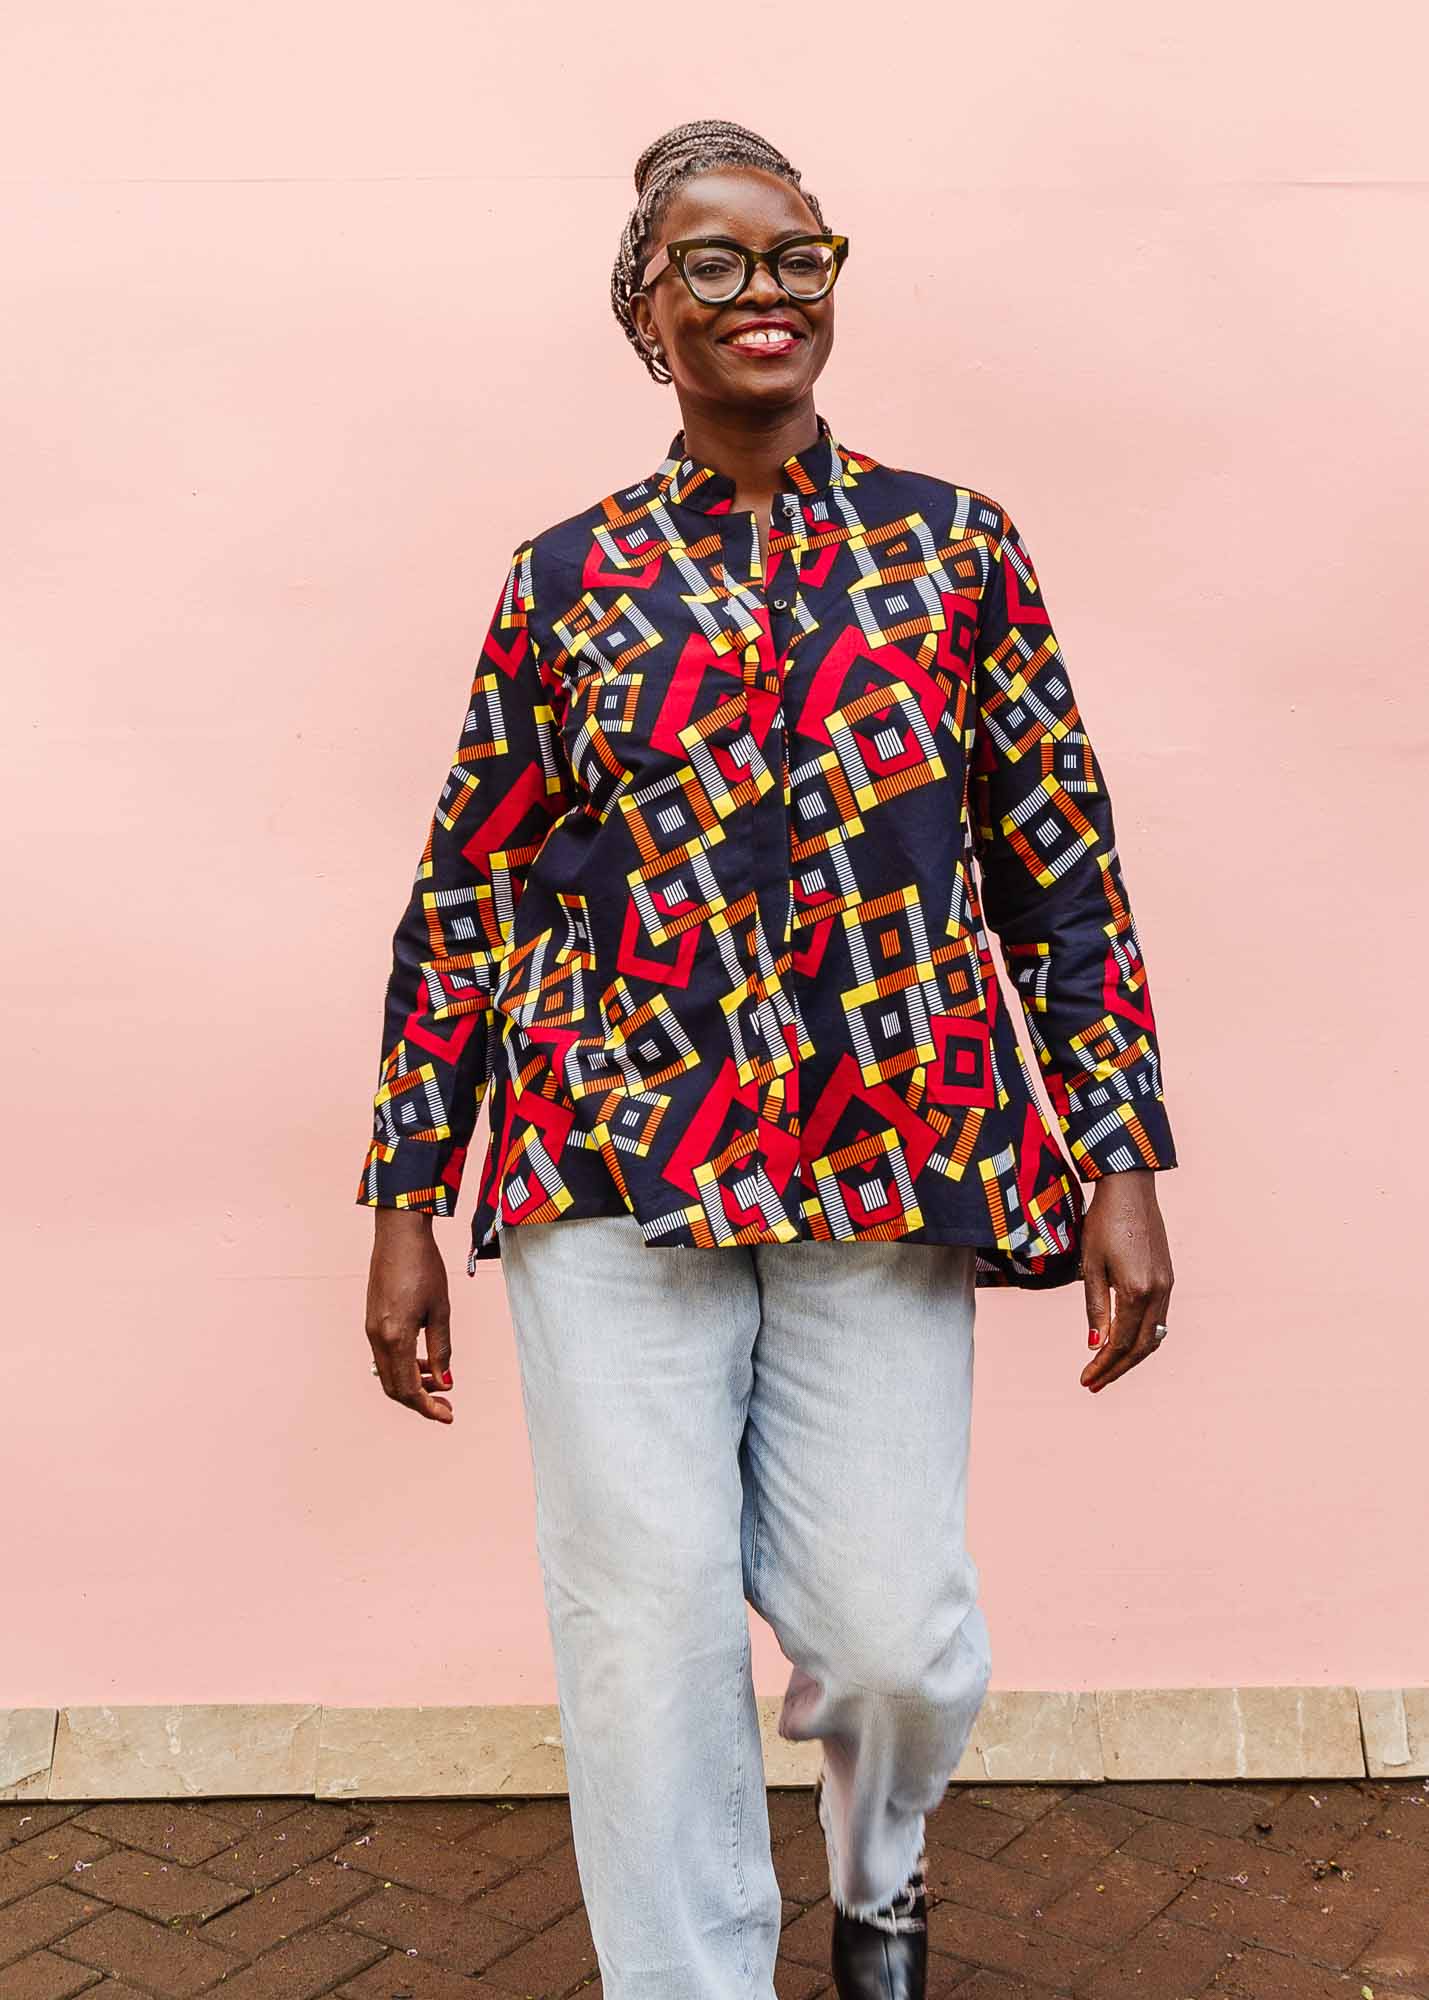 The model is wearing navy shirt with red, orange, yellow and white geometric print 